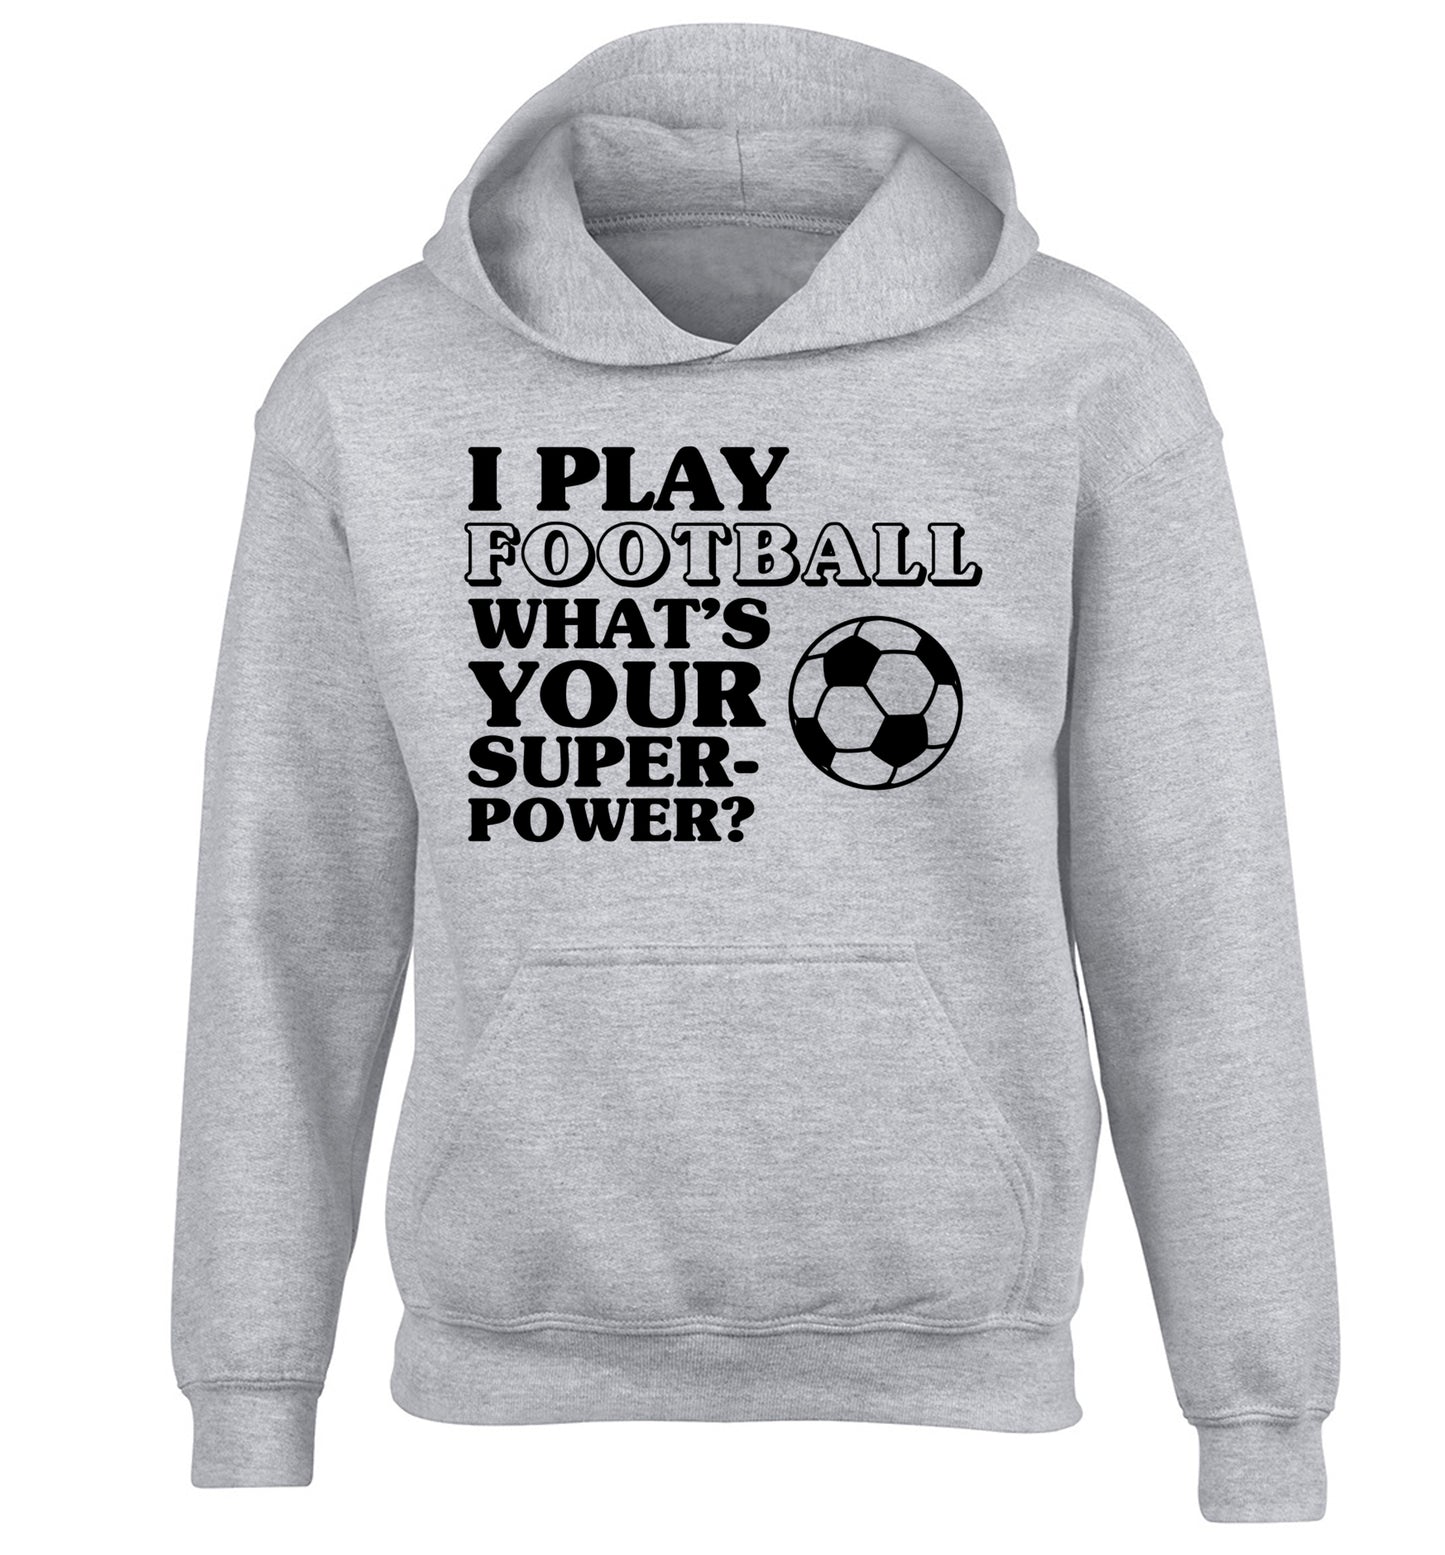 I play football what's your superpower? children's grey hoodie 12-14 Years